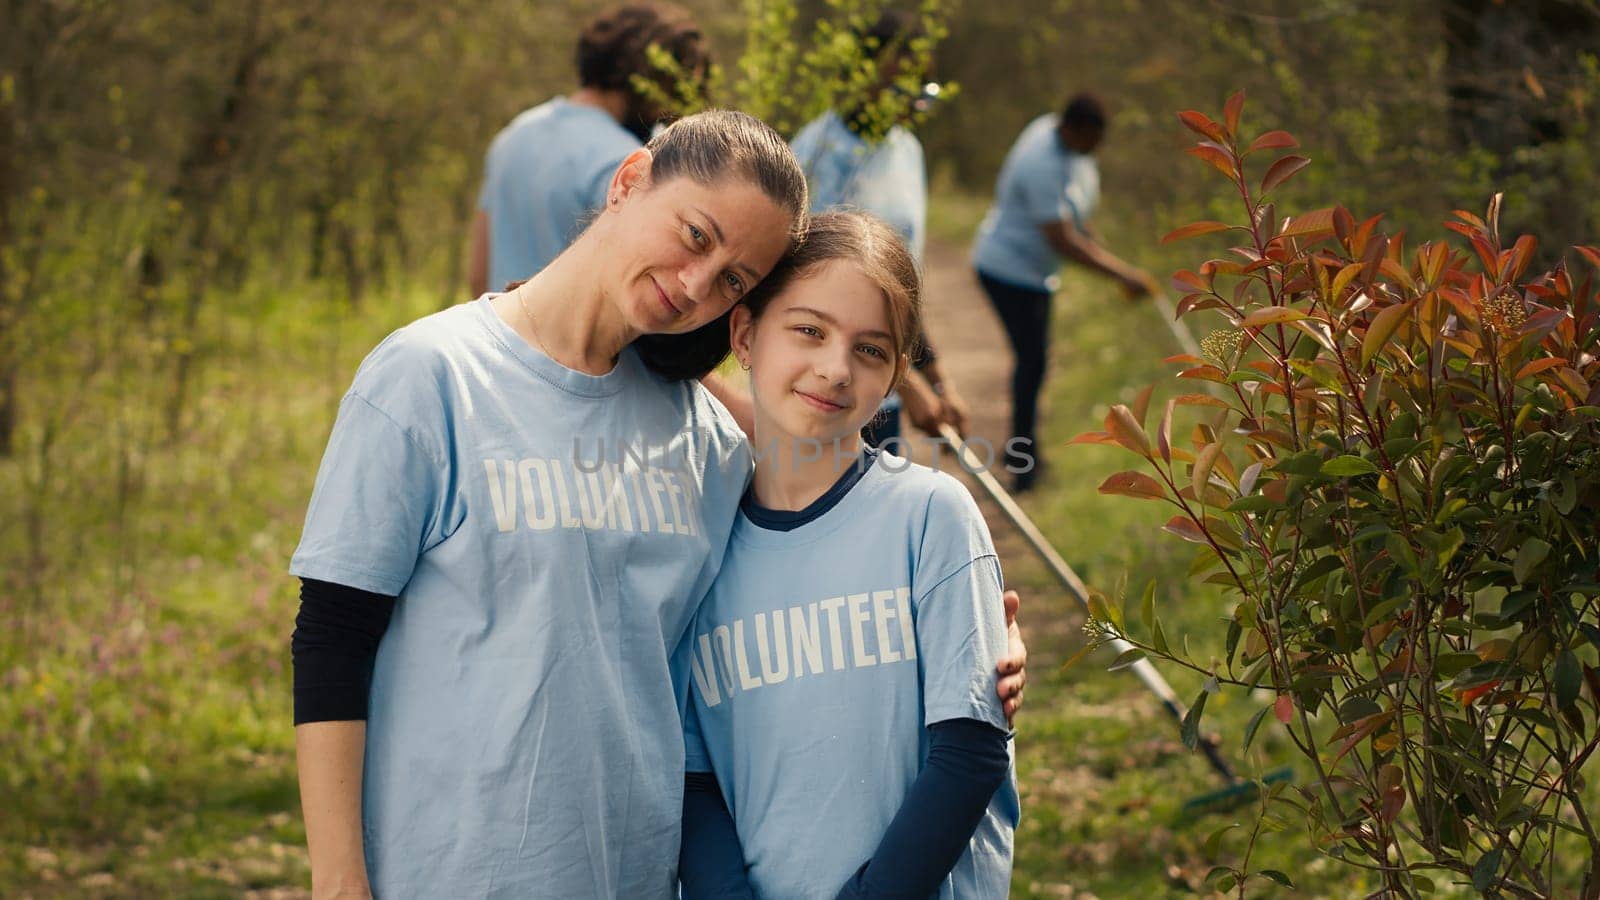 Portrait of mother and daughter volunteering to clean up a forest area by DCStudio